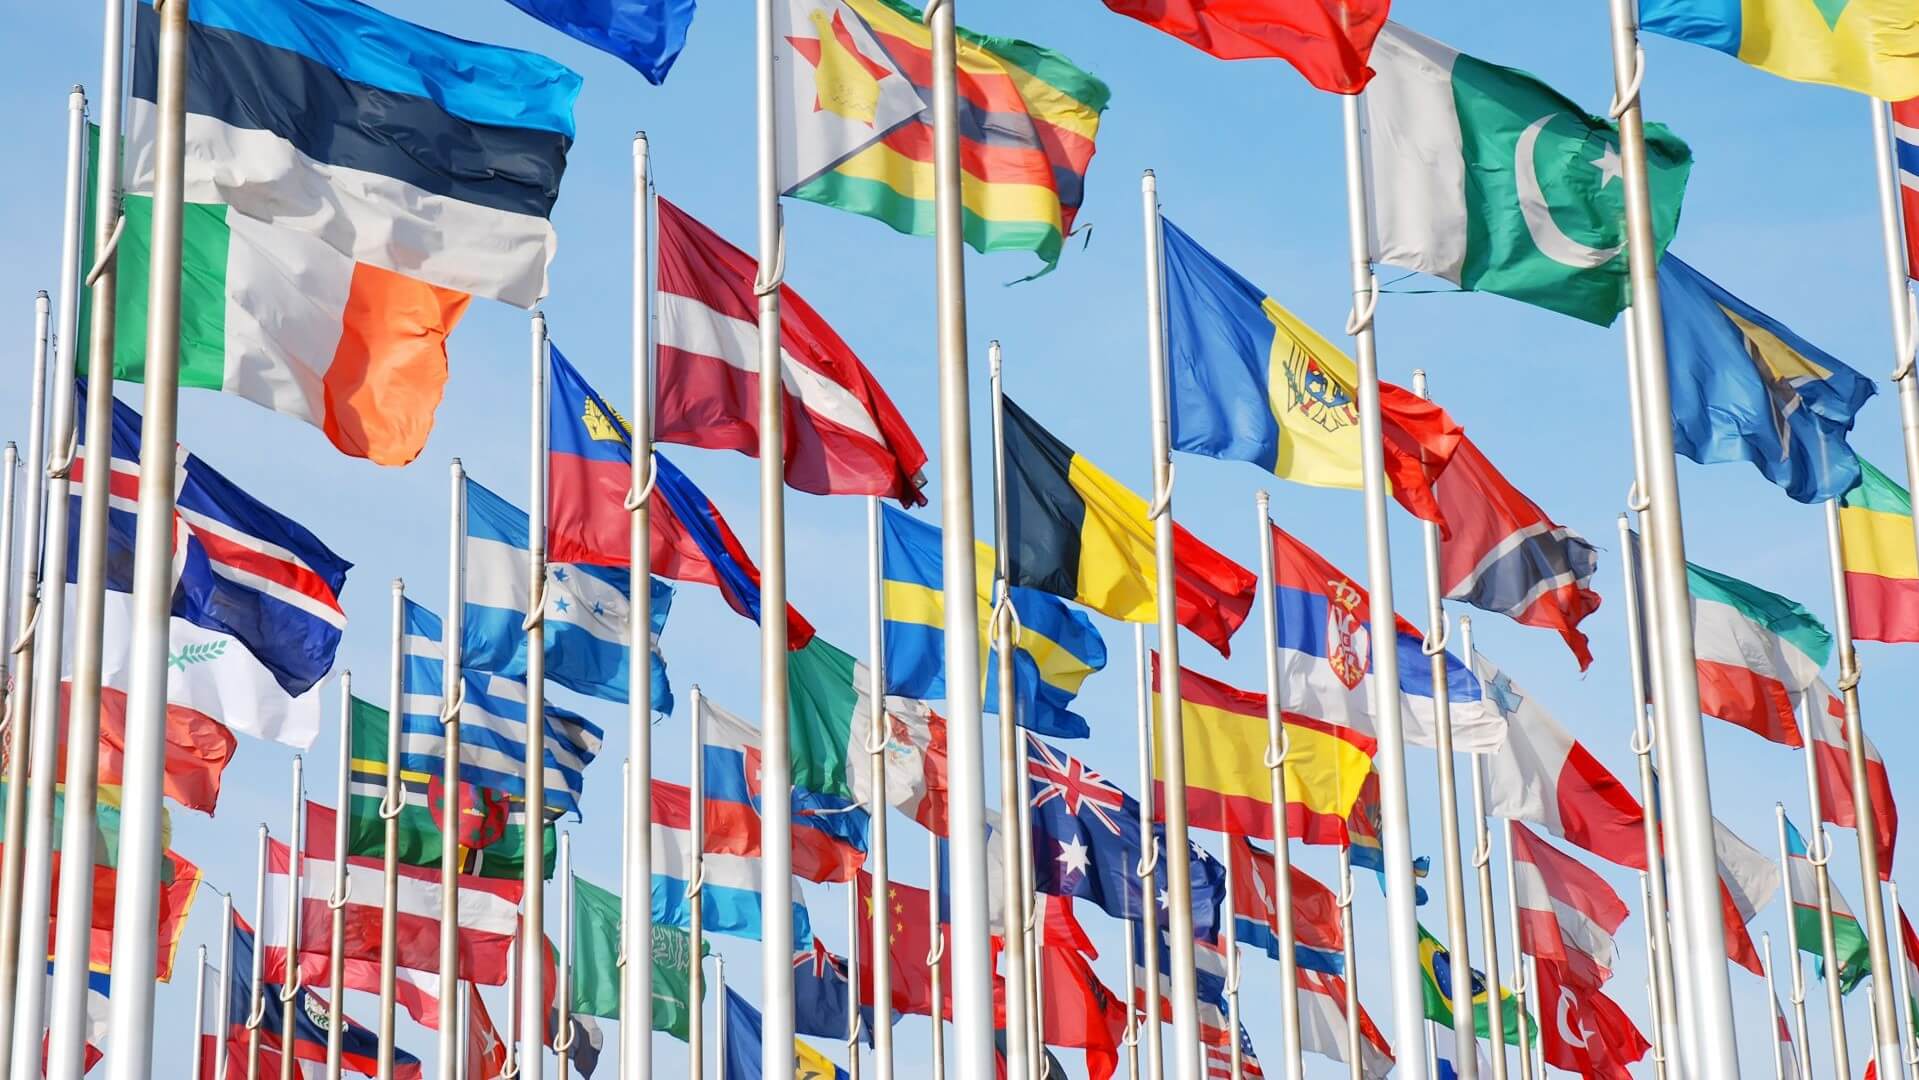 Group of flags flying from various countries